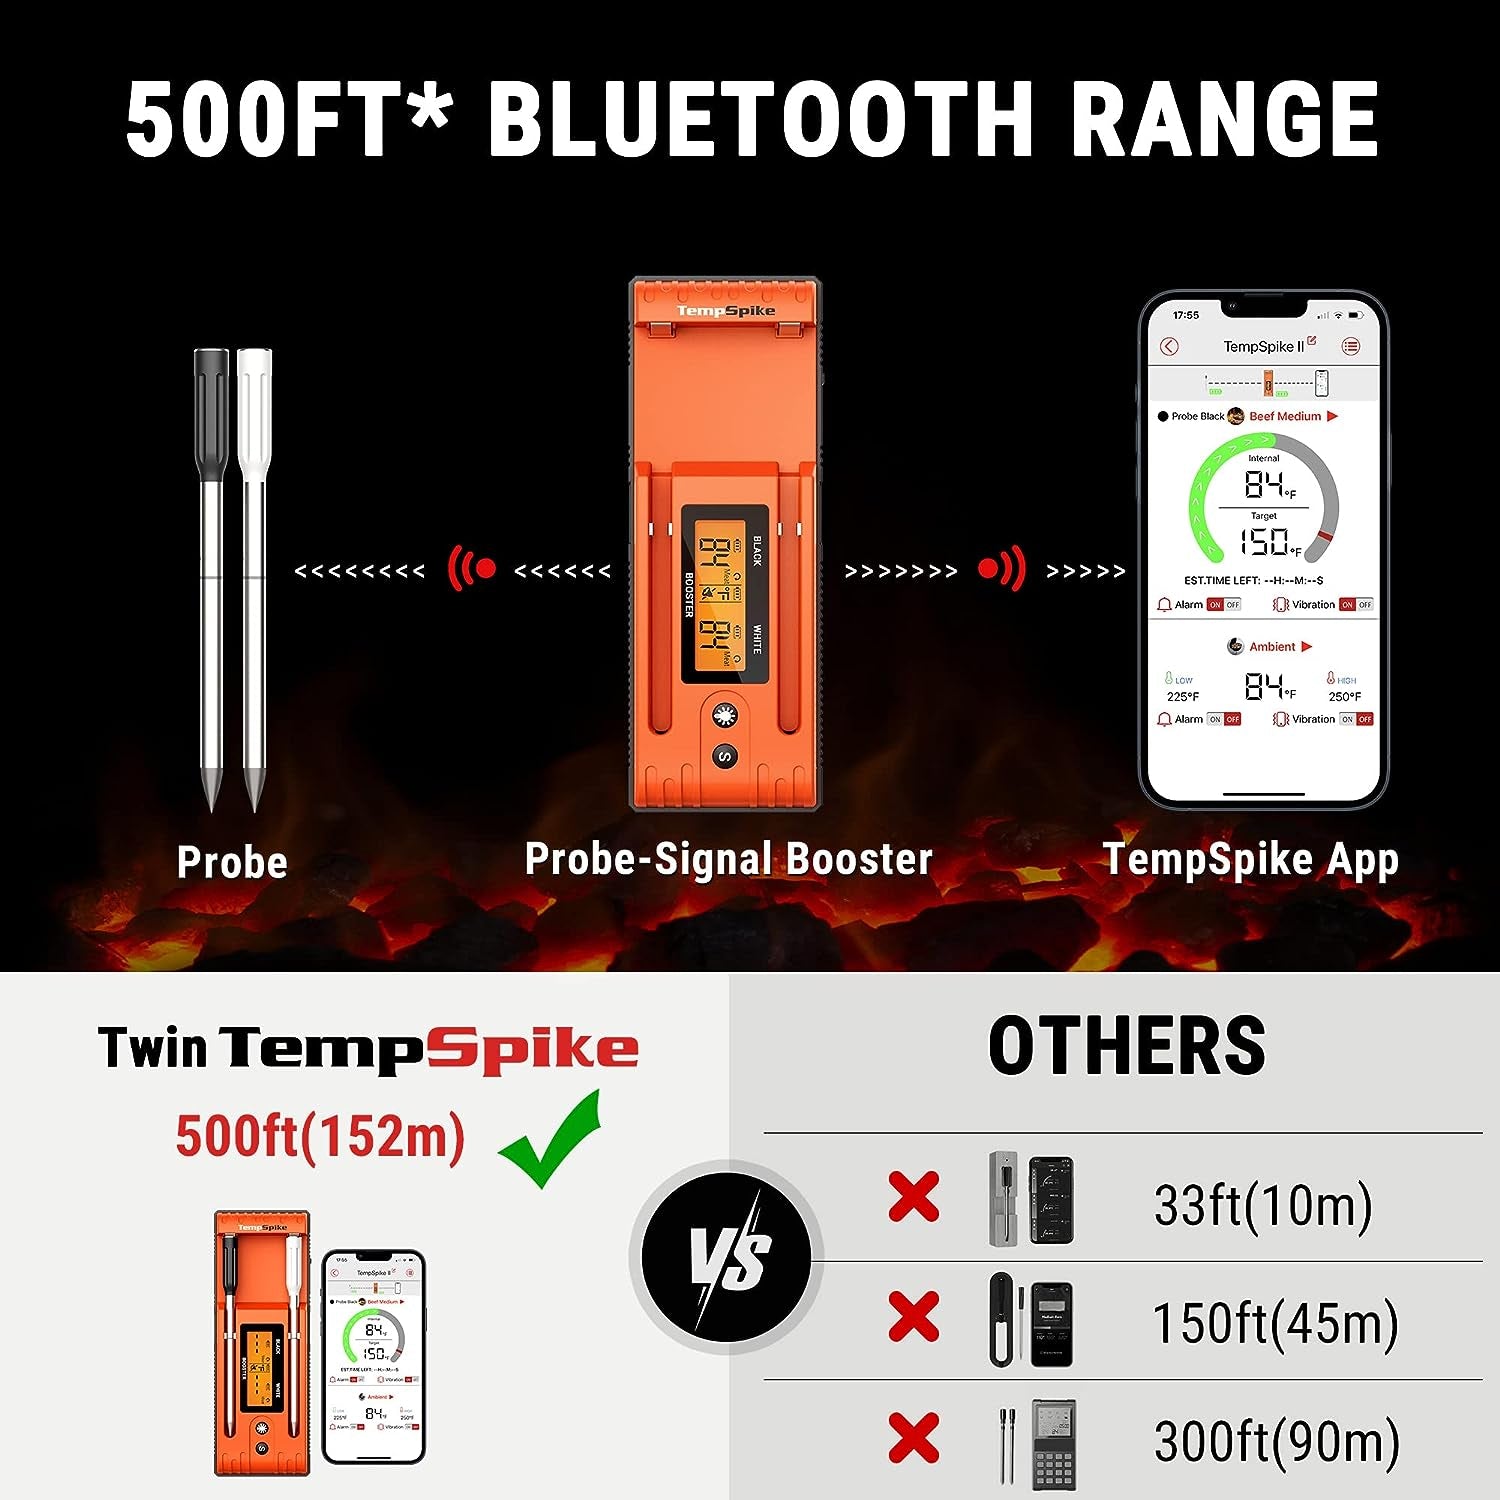 Tempspike Premium Truly Wireless Meat Thermometer up to 500-Ft